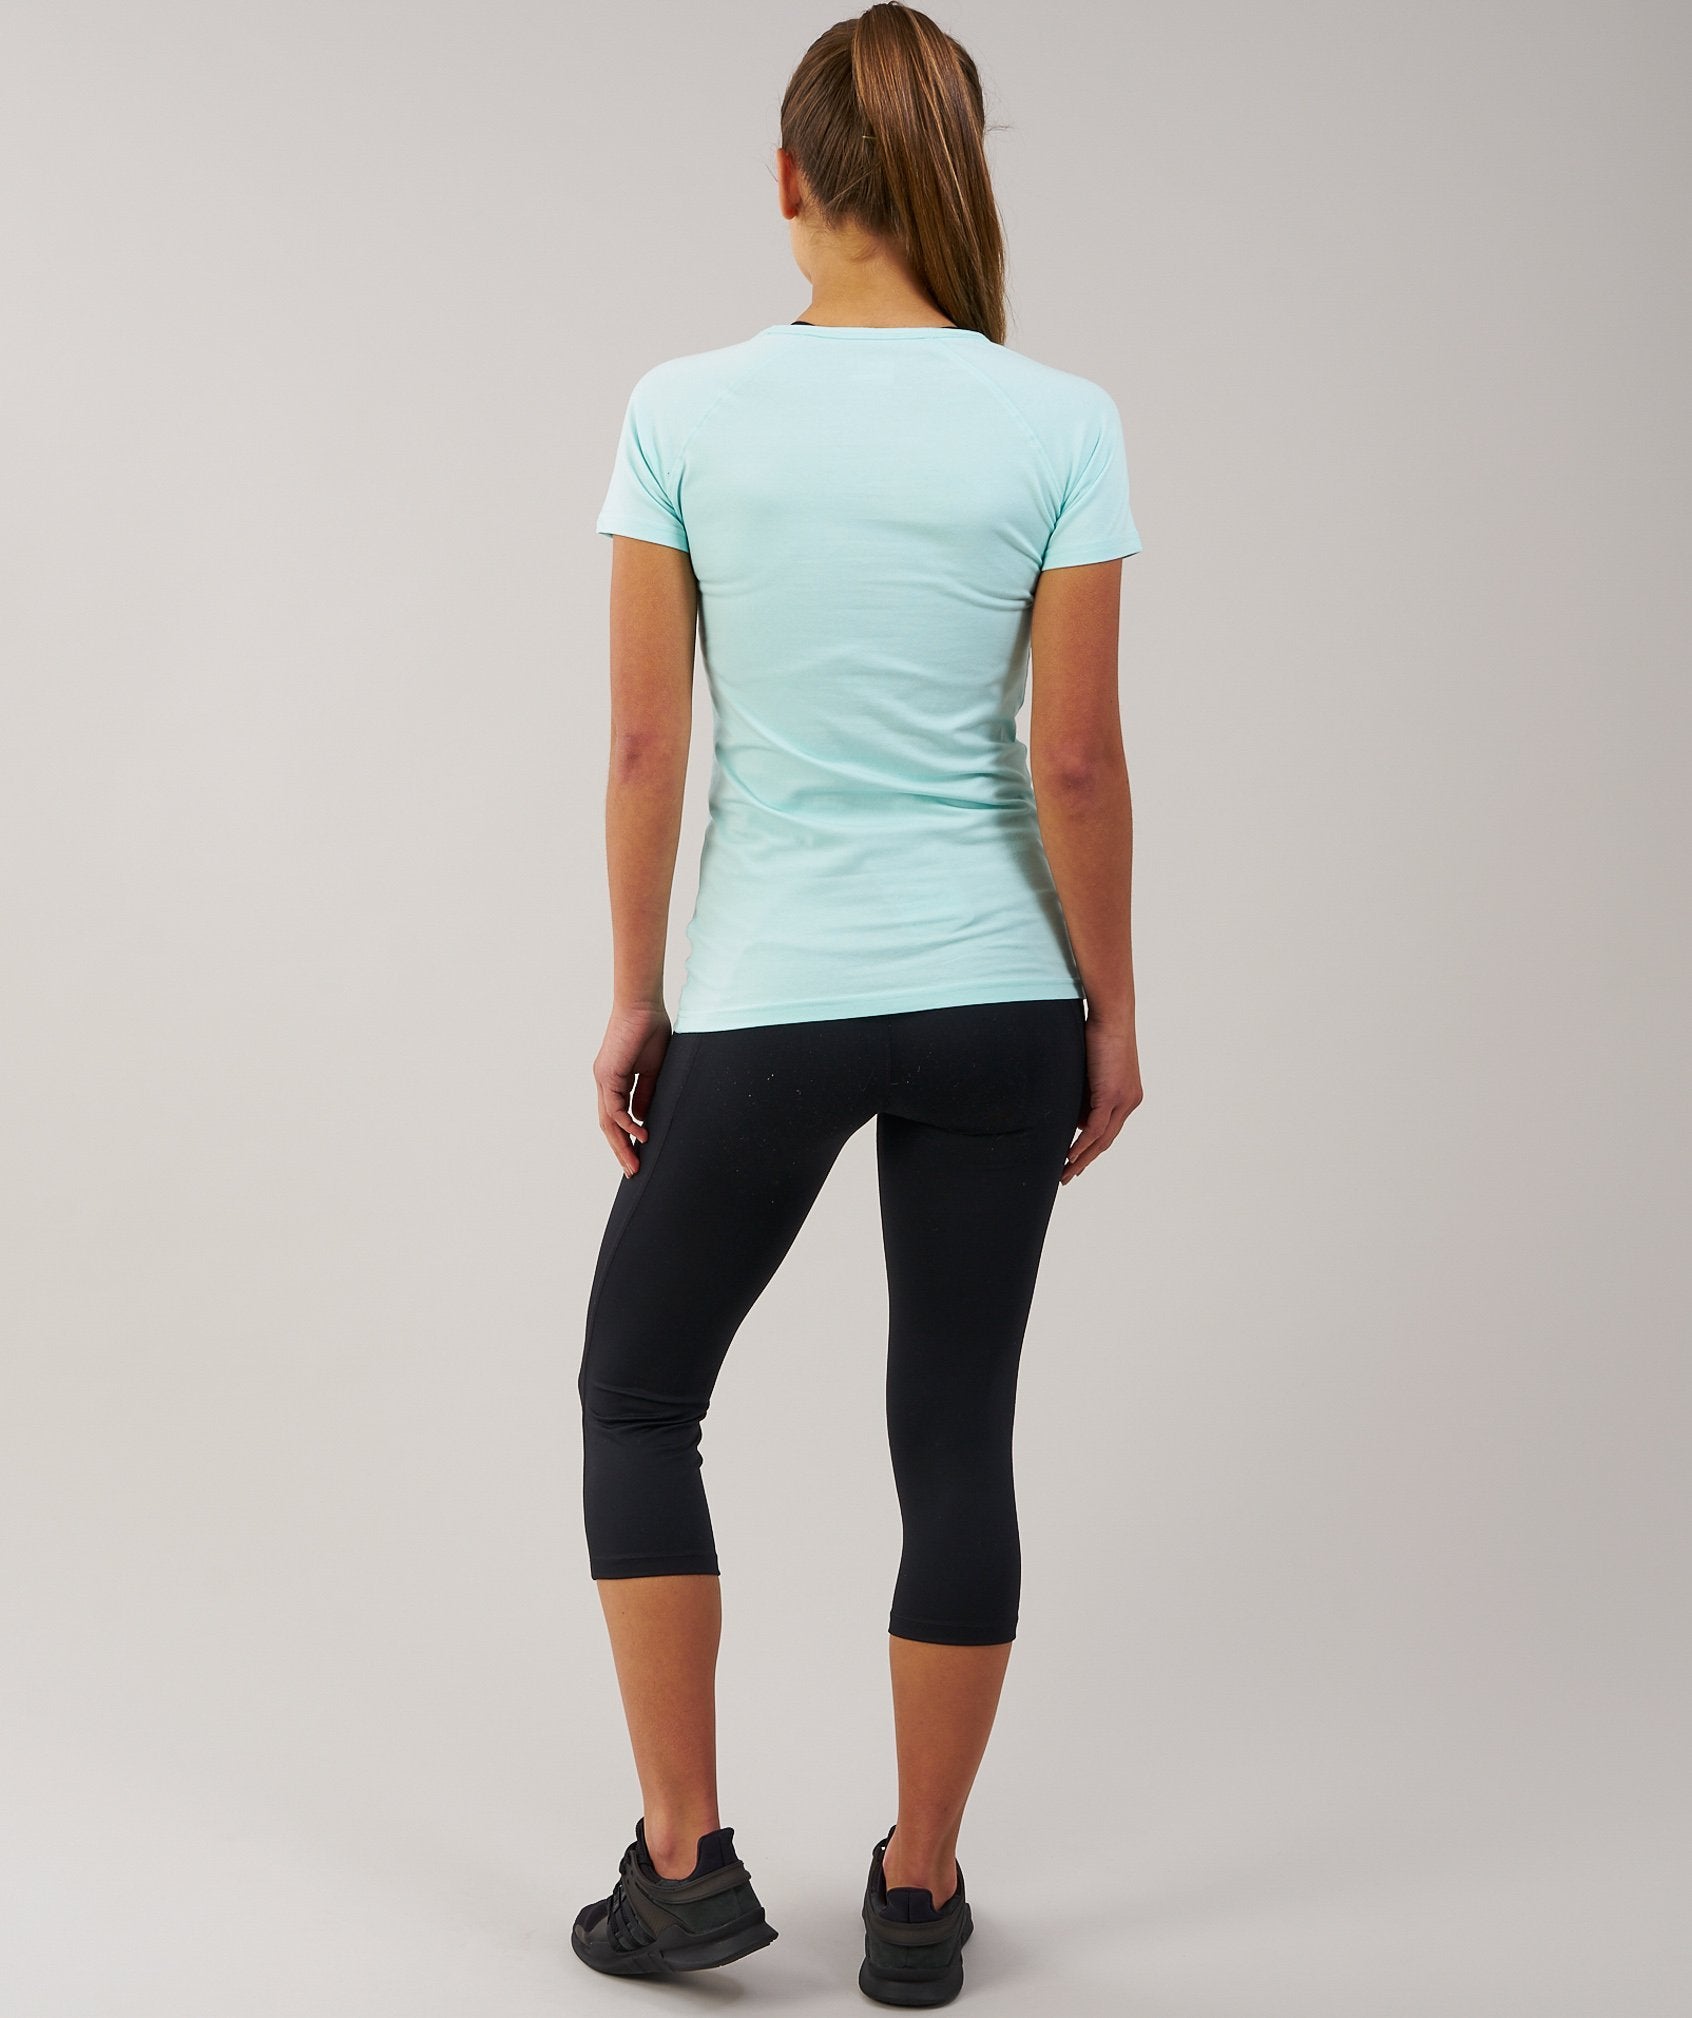 Women's Apollo T-Shirt in Pale Turquoise - view 2